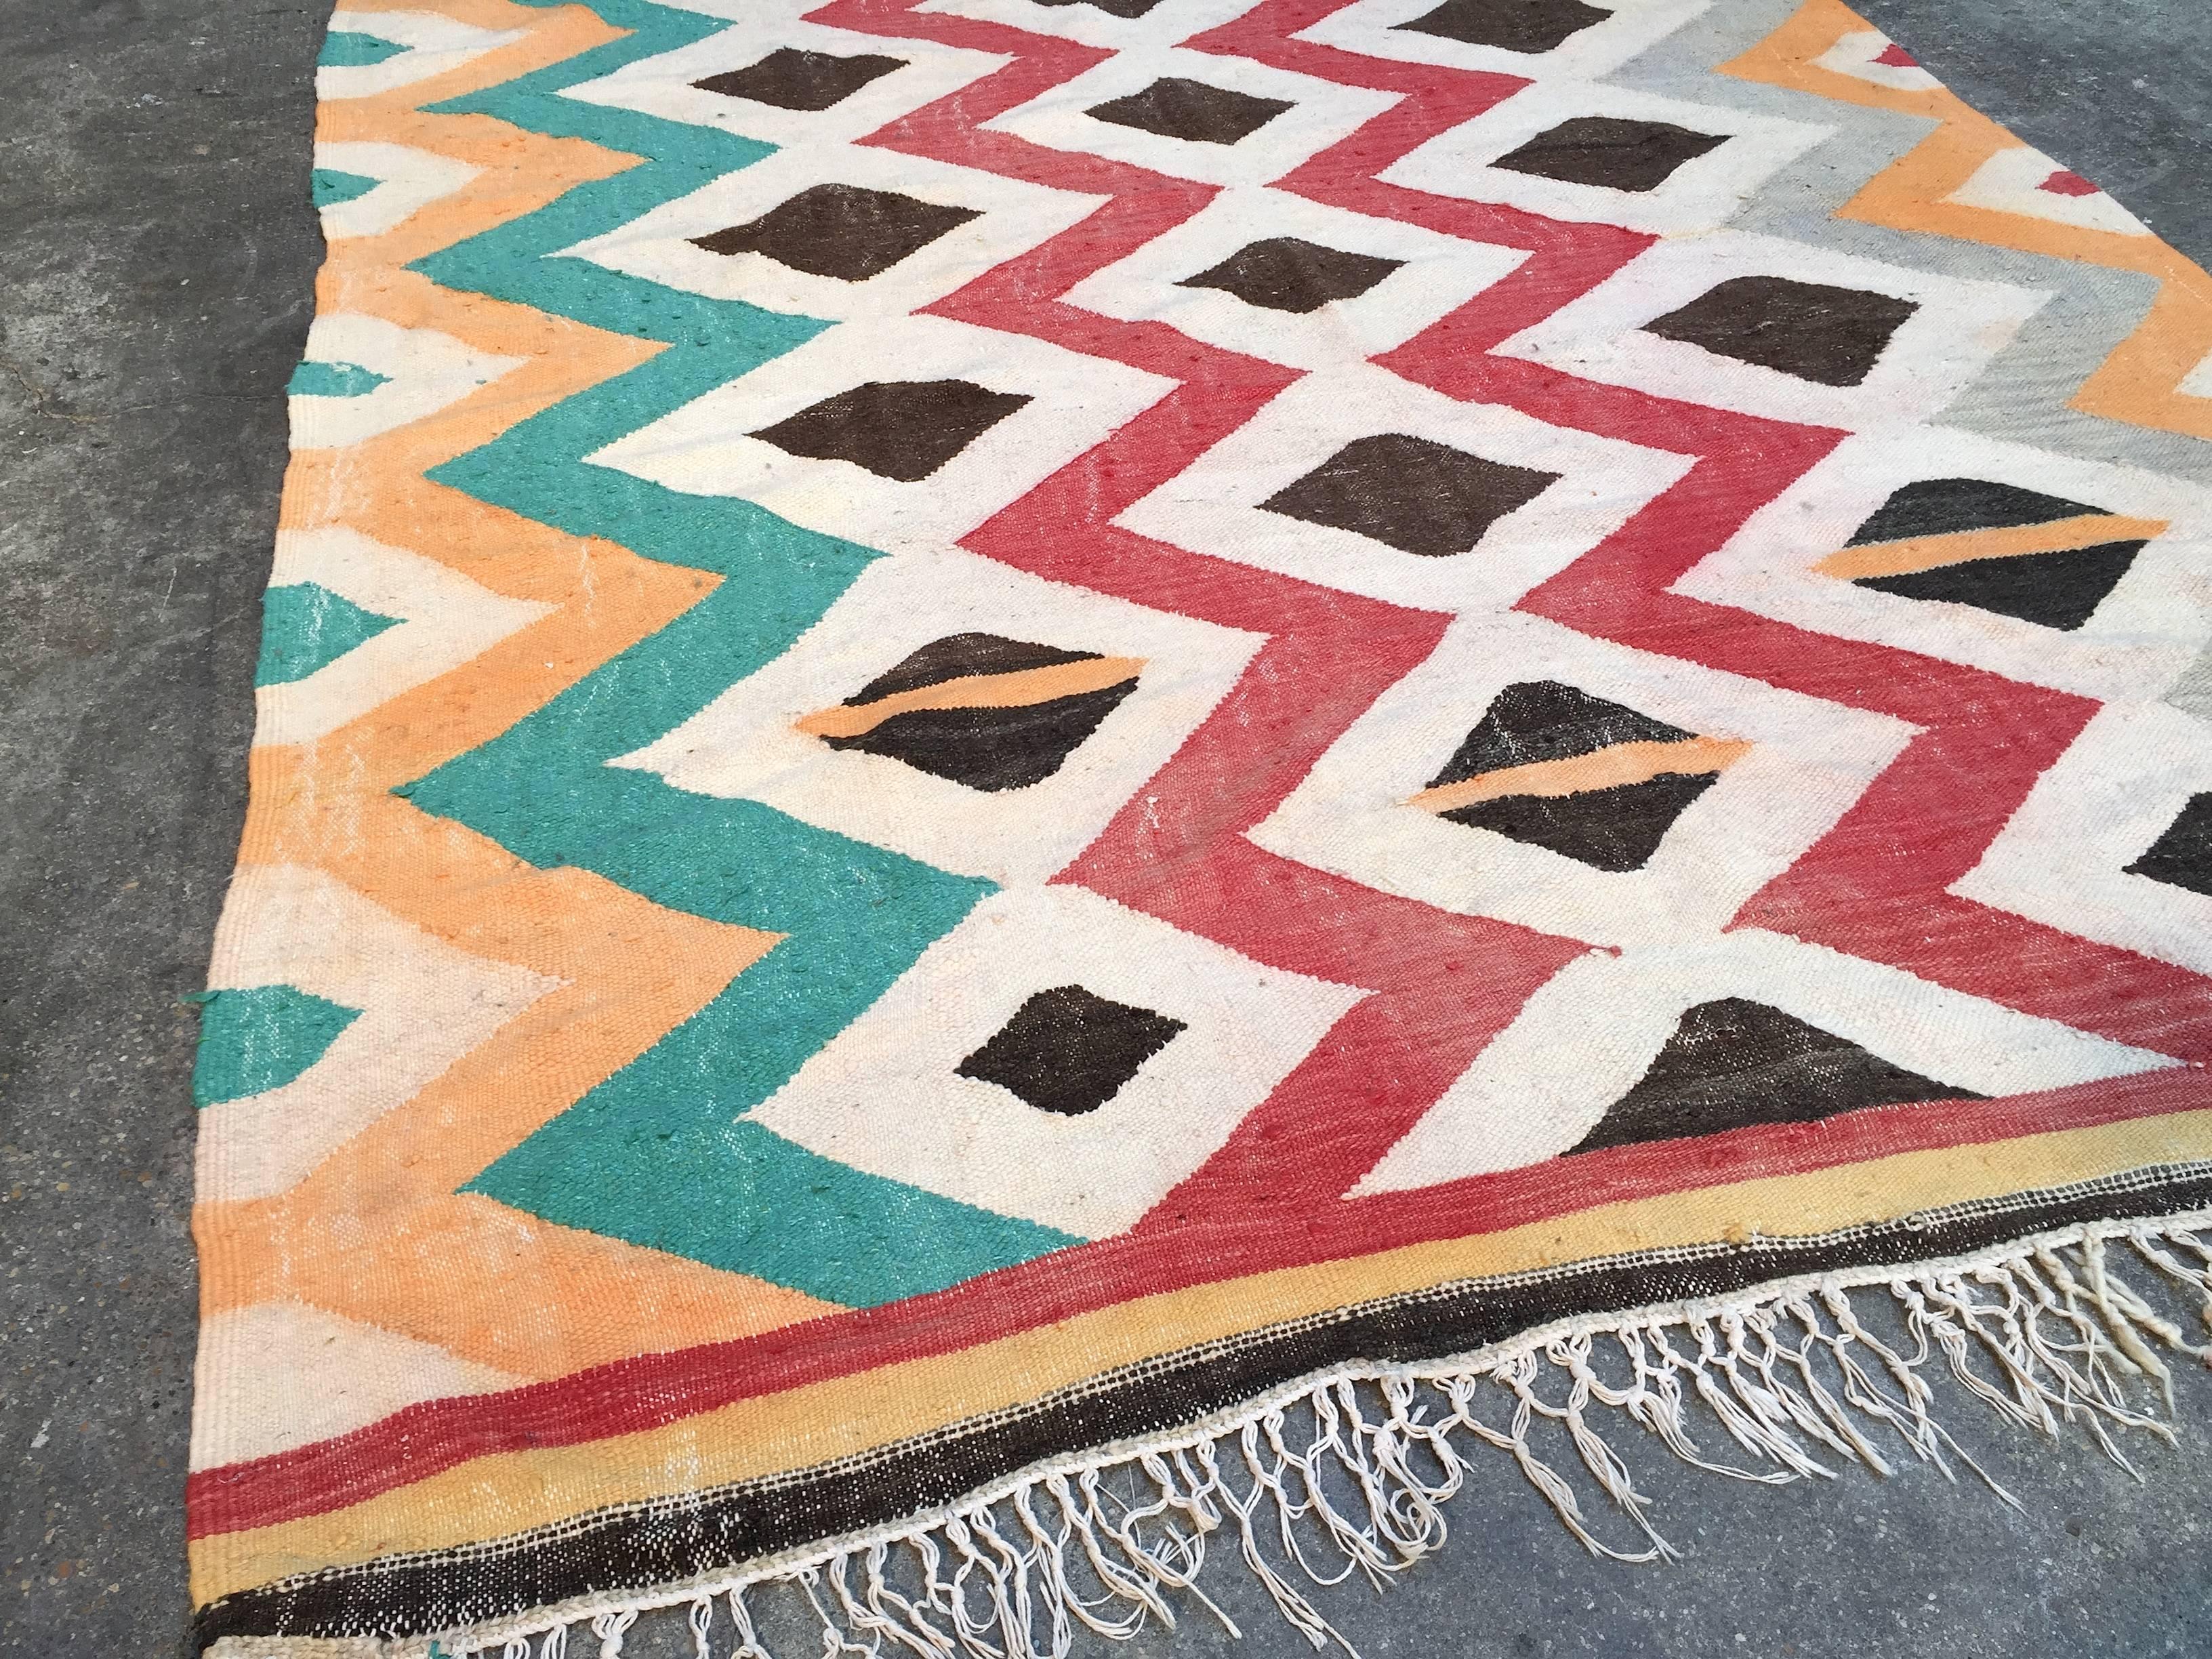 Vintage Moroccan Kilim rug
Handwoven wool, cotton
One of a kind abstract piece 
1980s.